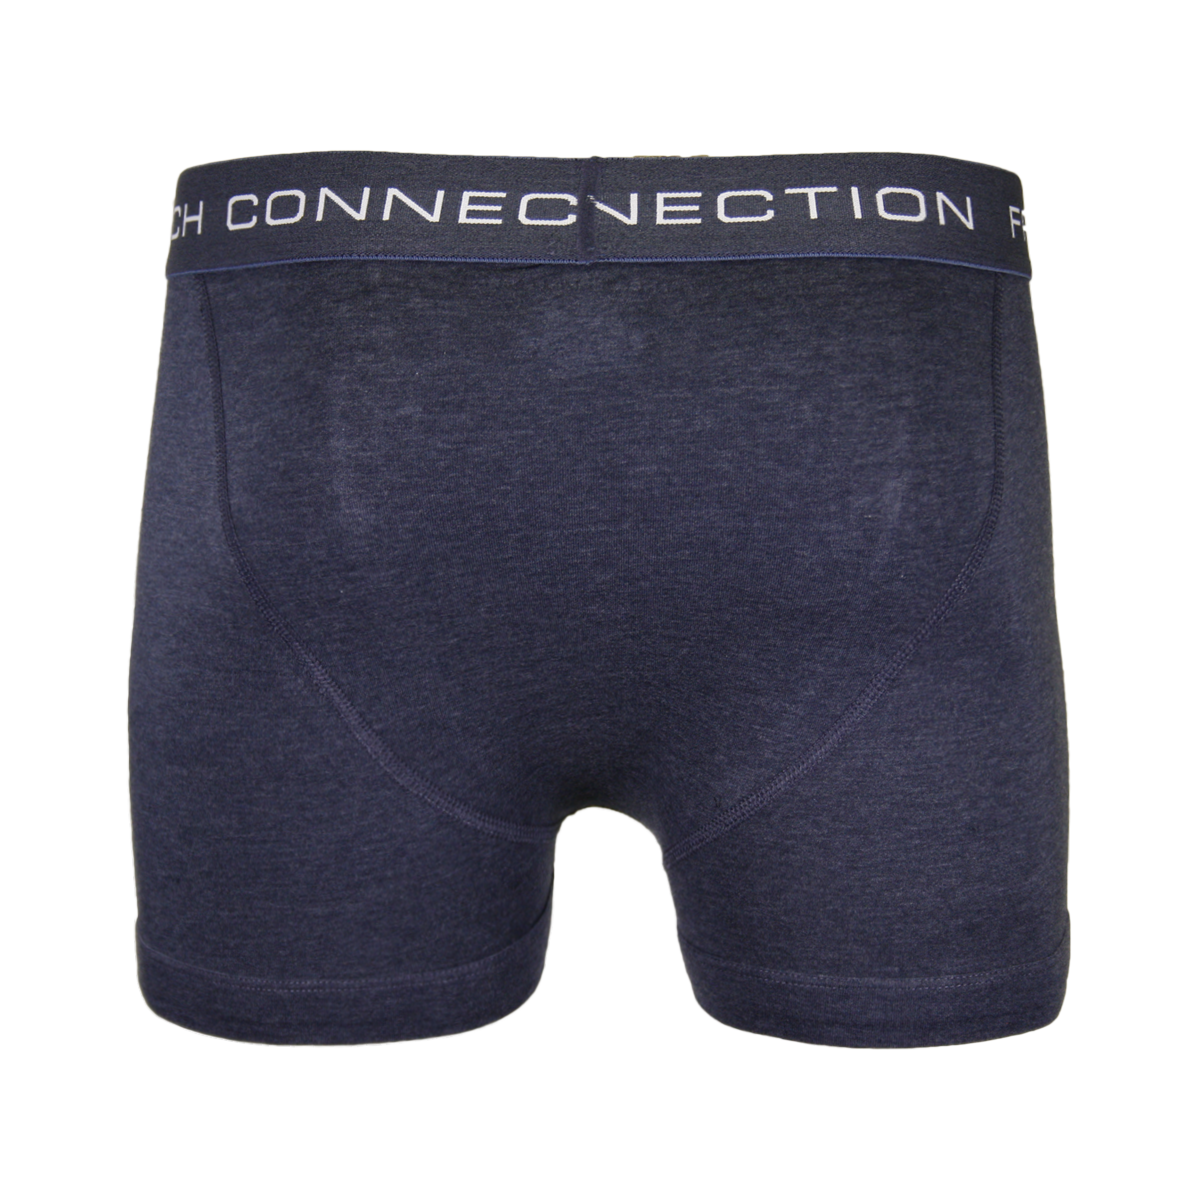 French Connection Men's 3 Pack Navy Blue w/ Navy Blue Strap Boxer Briefs (S05)